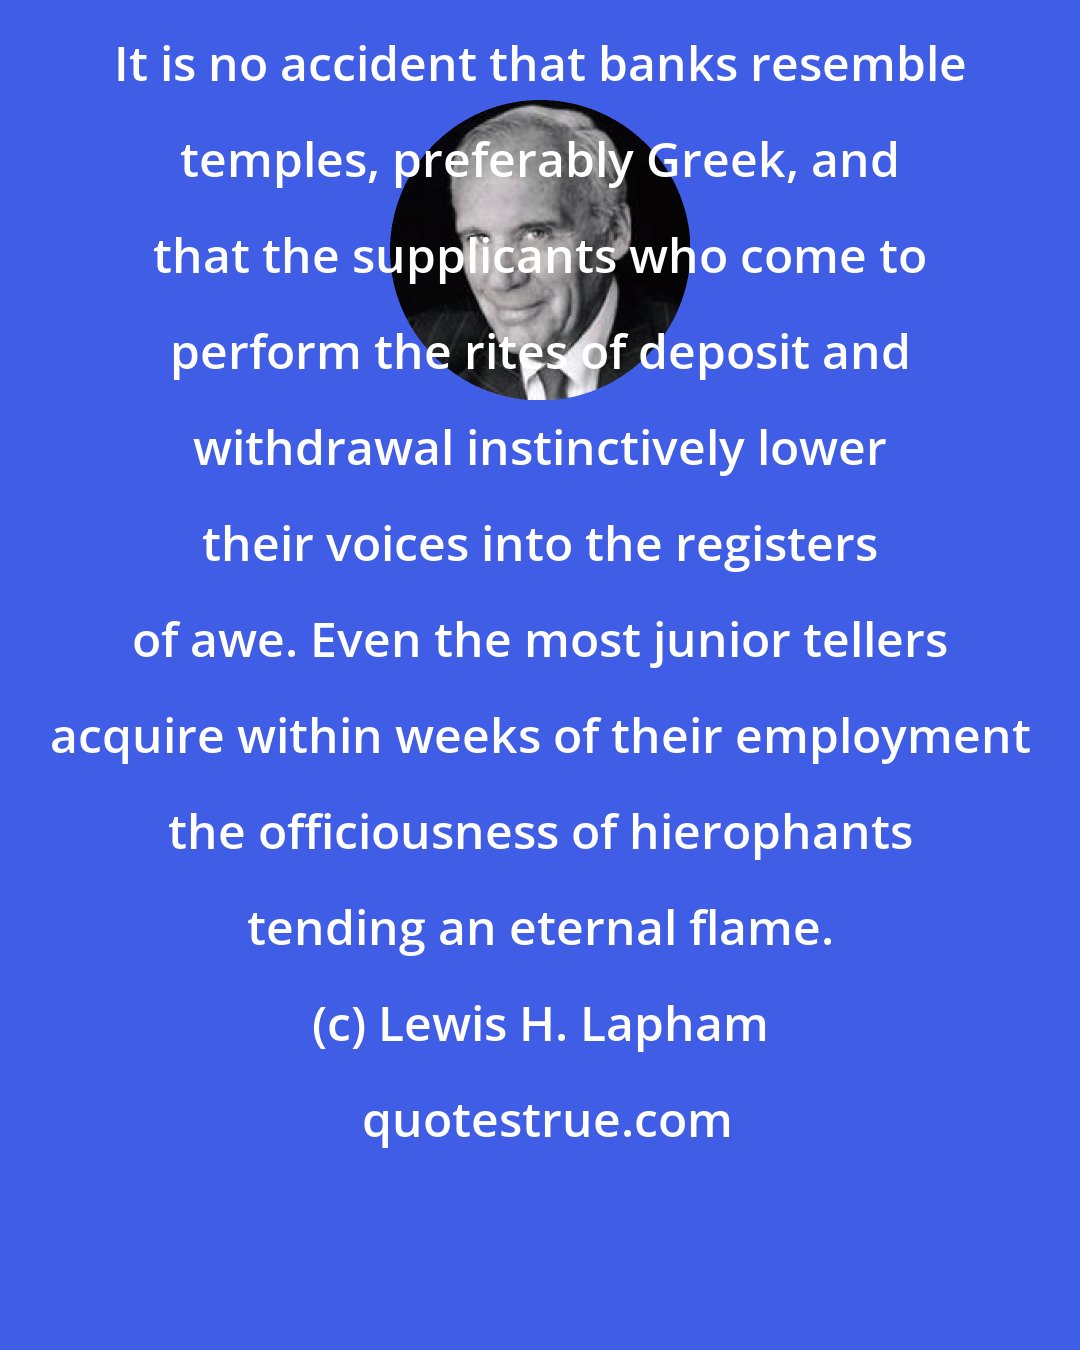 Lewis H. Lapham: It is no accident that banks resemble temples, preferably Greek, and that the supplicants who come to perform the rites of deposit and withdrawal instinctively lower their voices into the registers of awe. Even the most junior tellers acquire within weeks of their employment the officiousness of hierophants tending an eternal flame.